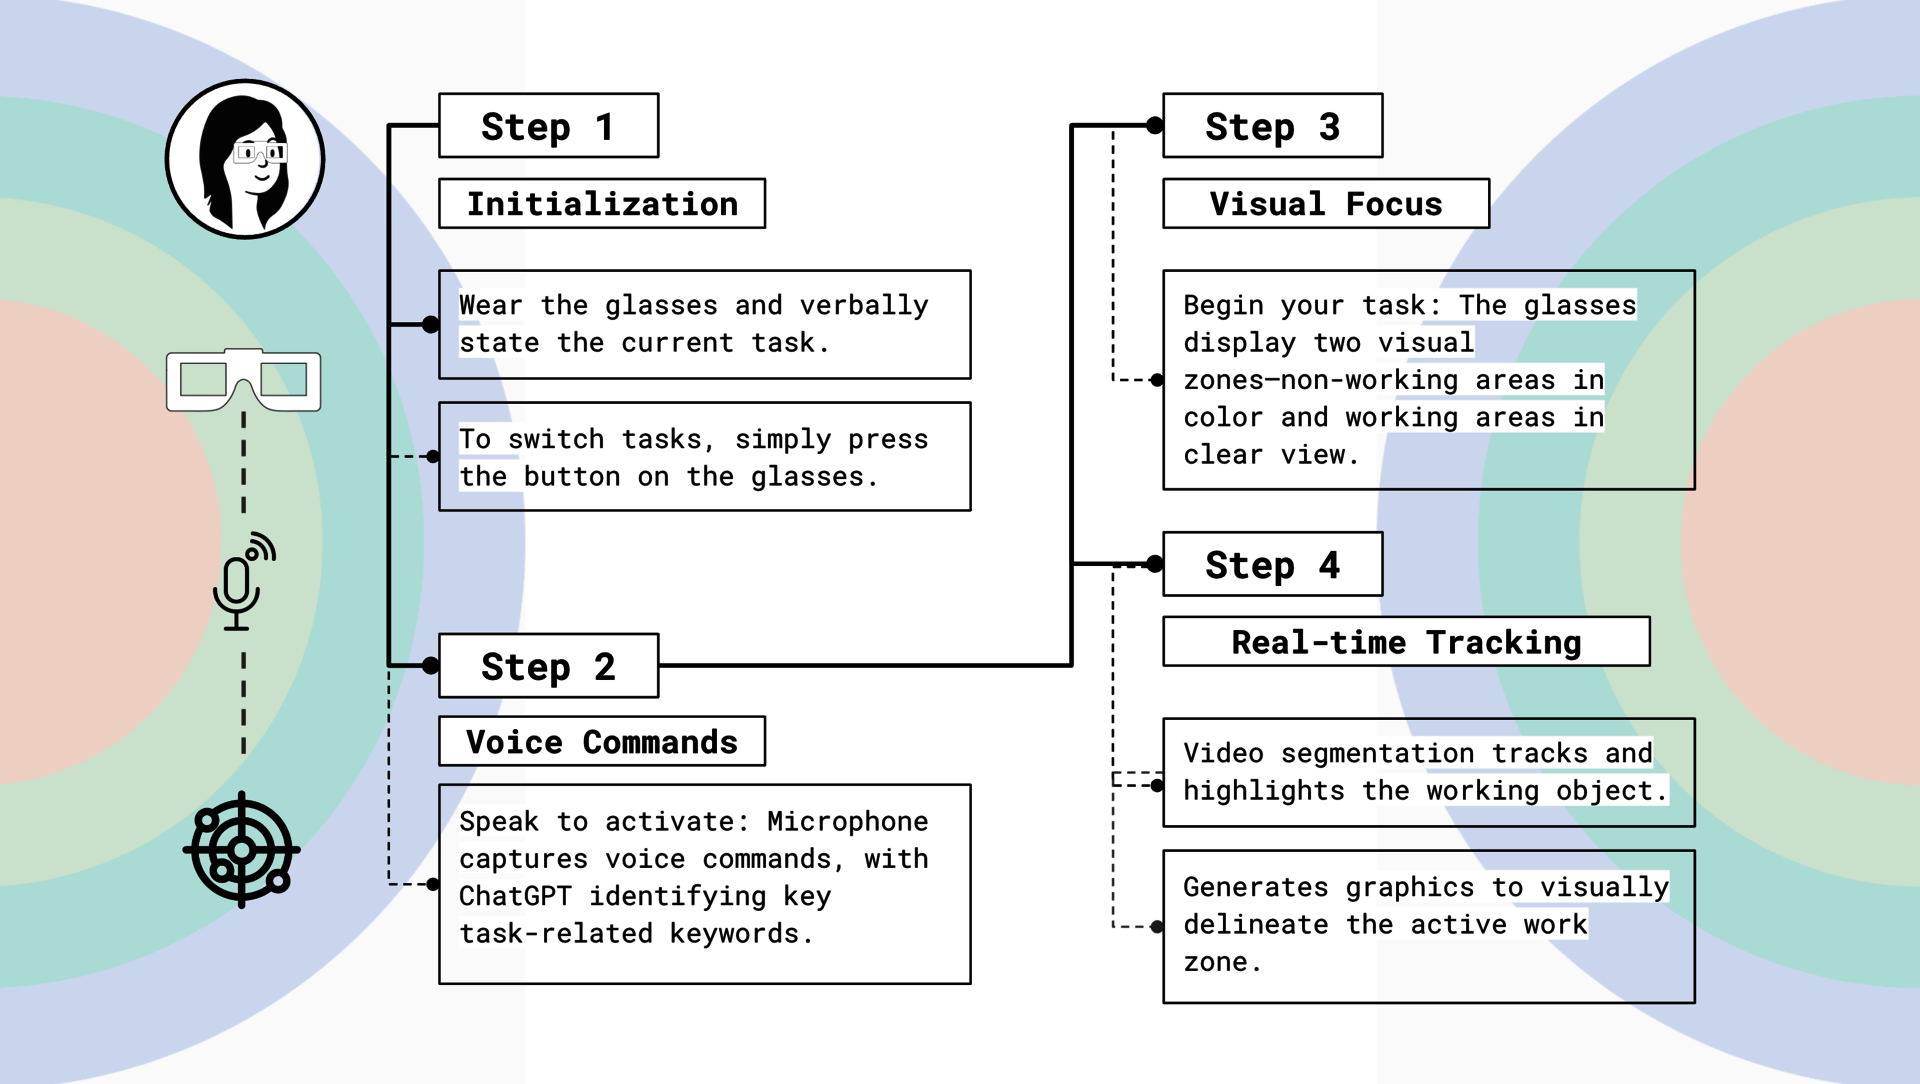 Flowchart showing four steps of operating ChromaCalm AR glasses: starting with initialization, activating through voice, adjusting visual focus, and real-time tracking of tasks.